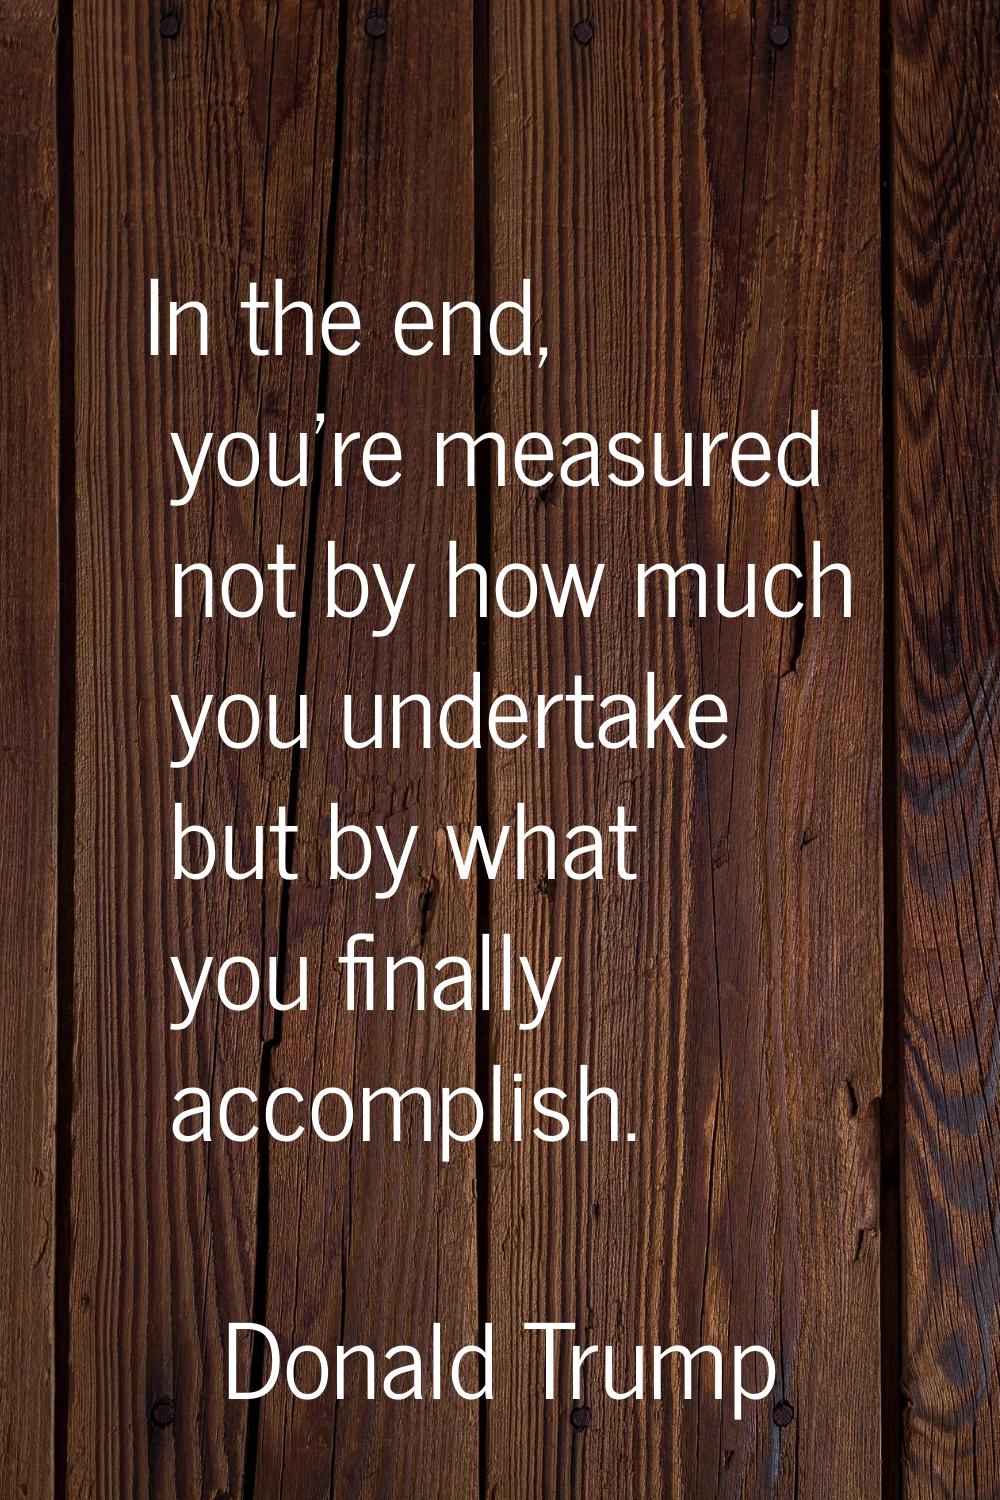 In the end, you're measured not by how much you undertake but by what you finally accomplish.